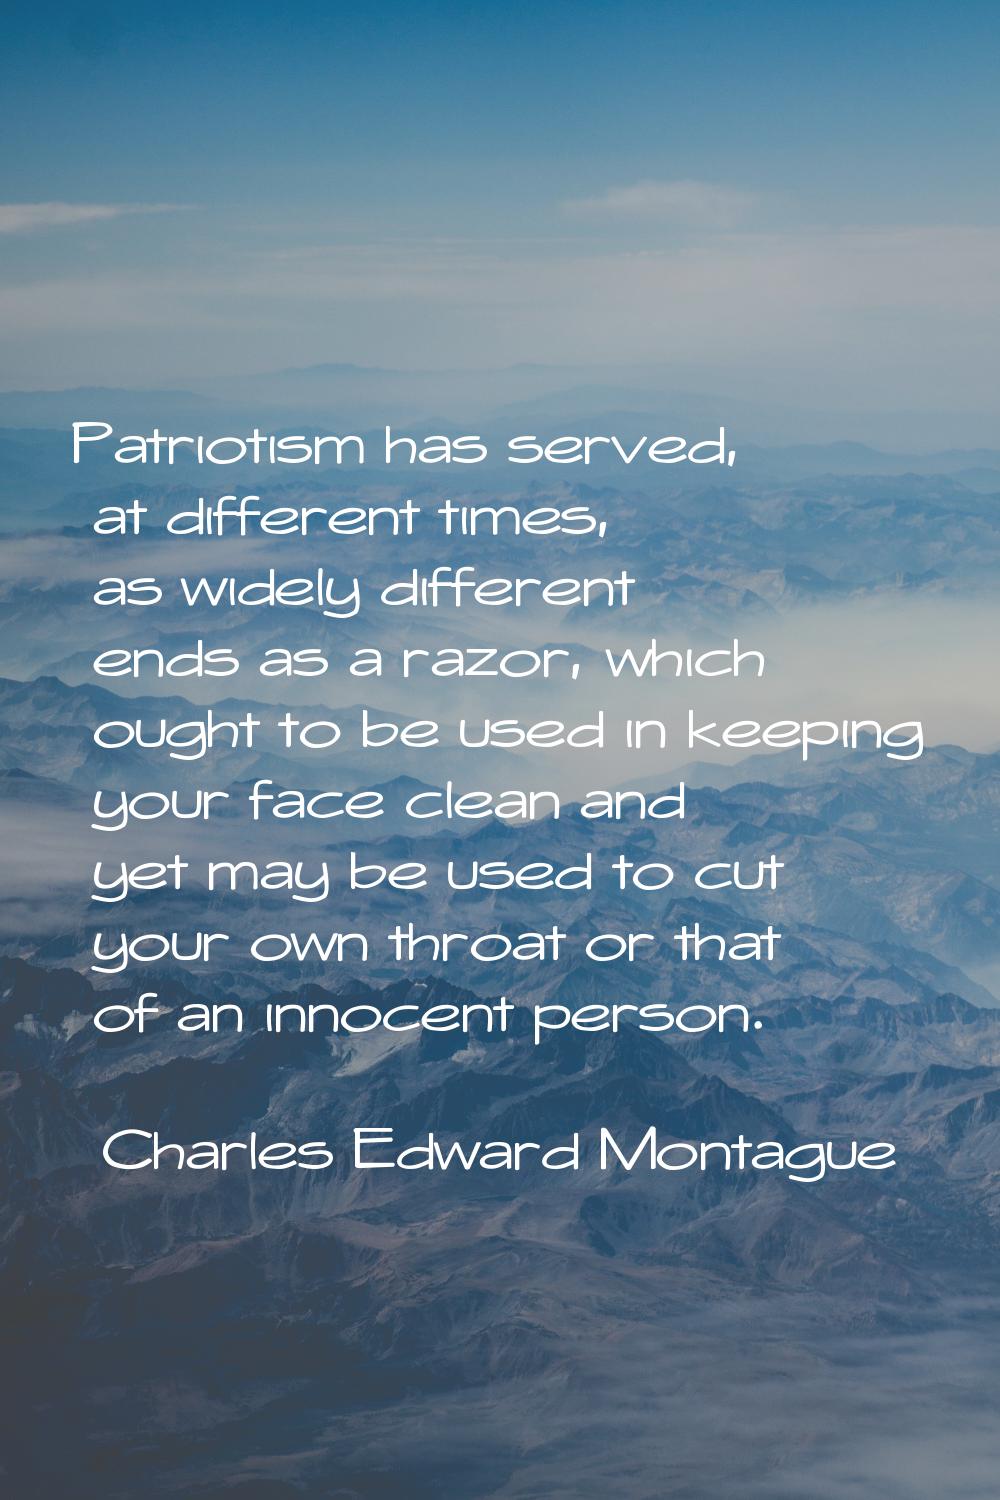 Patriotism has served, at different times, as widely different ends as a razor, which ought to be u